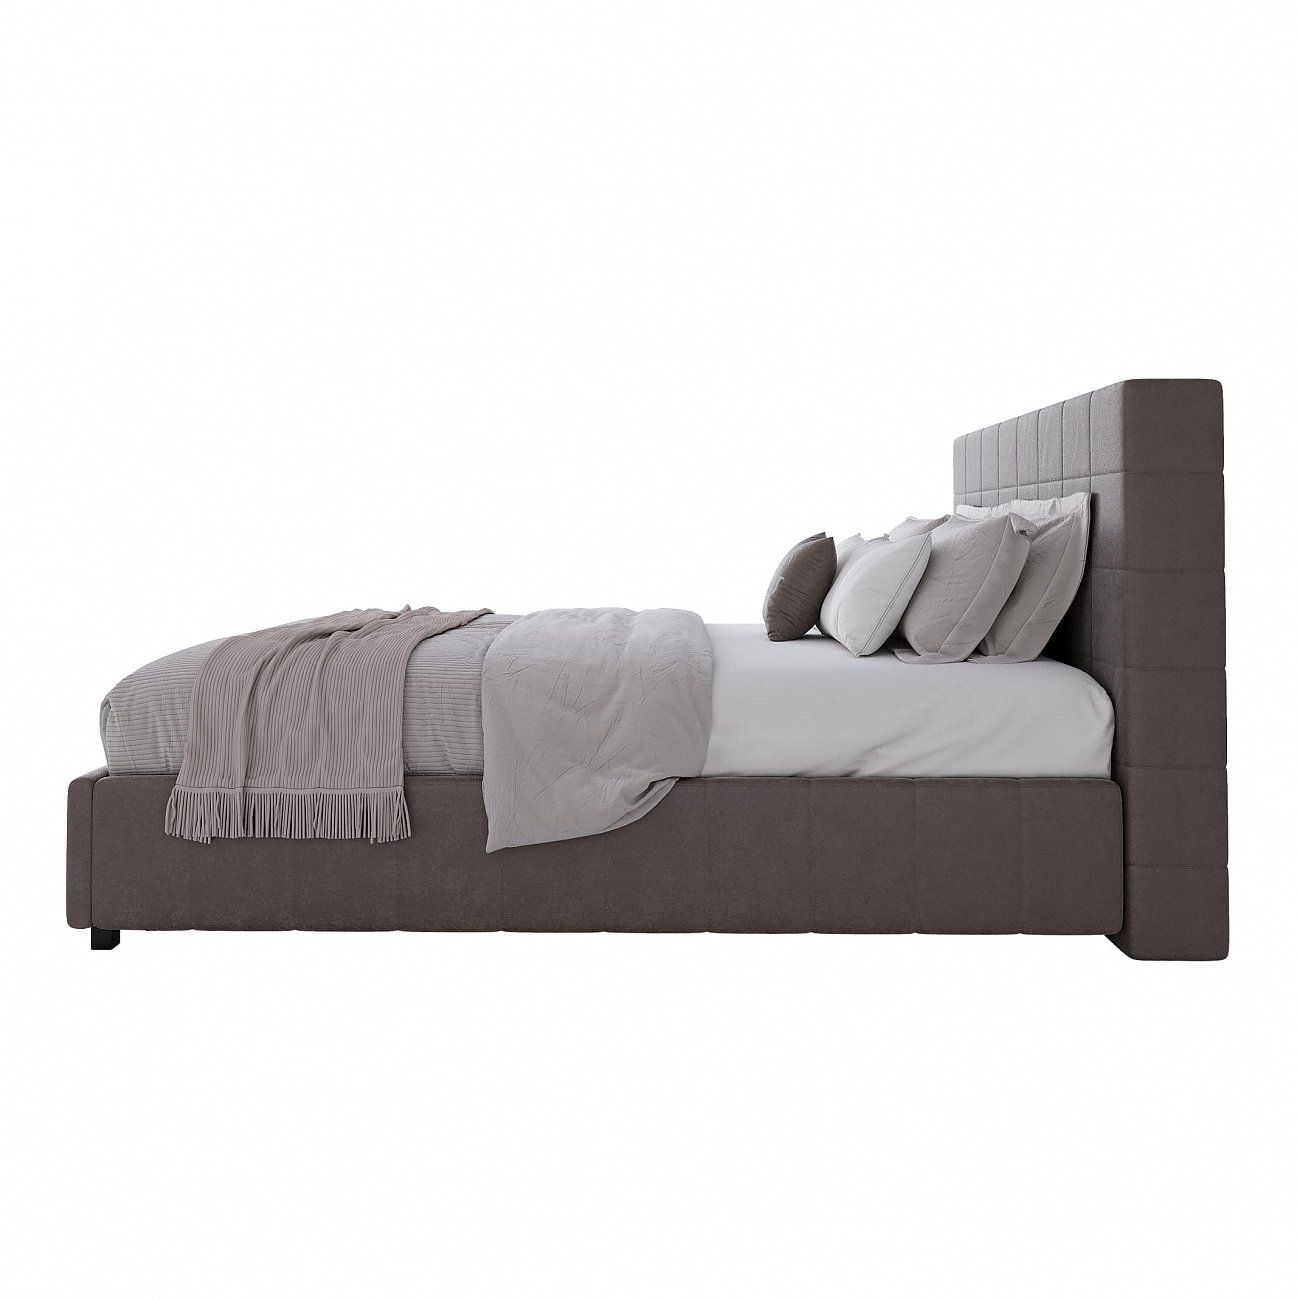 Double bed 160x200 cm gray-brown Shining Modern